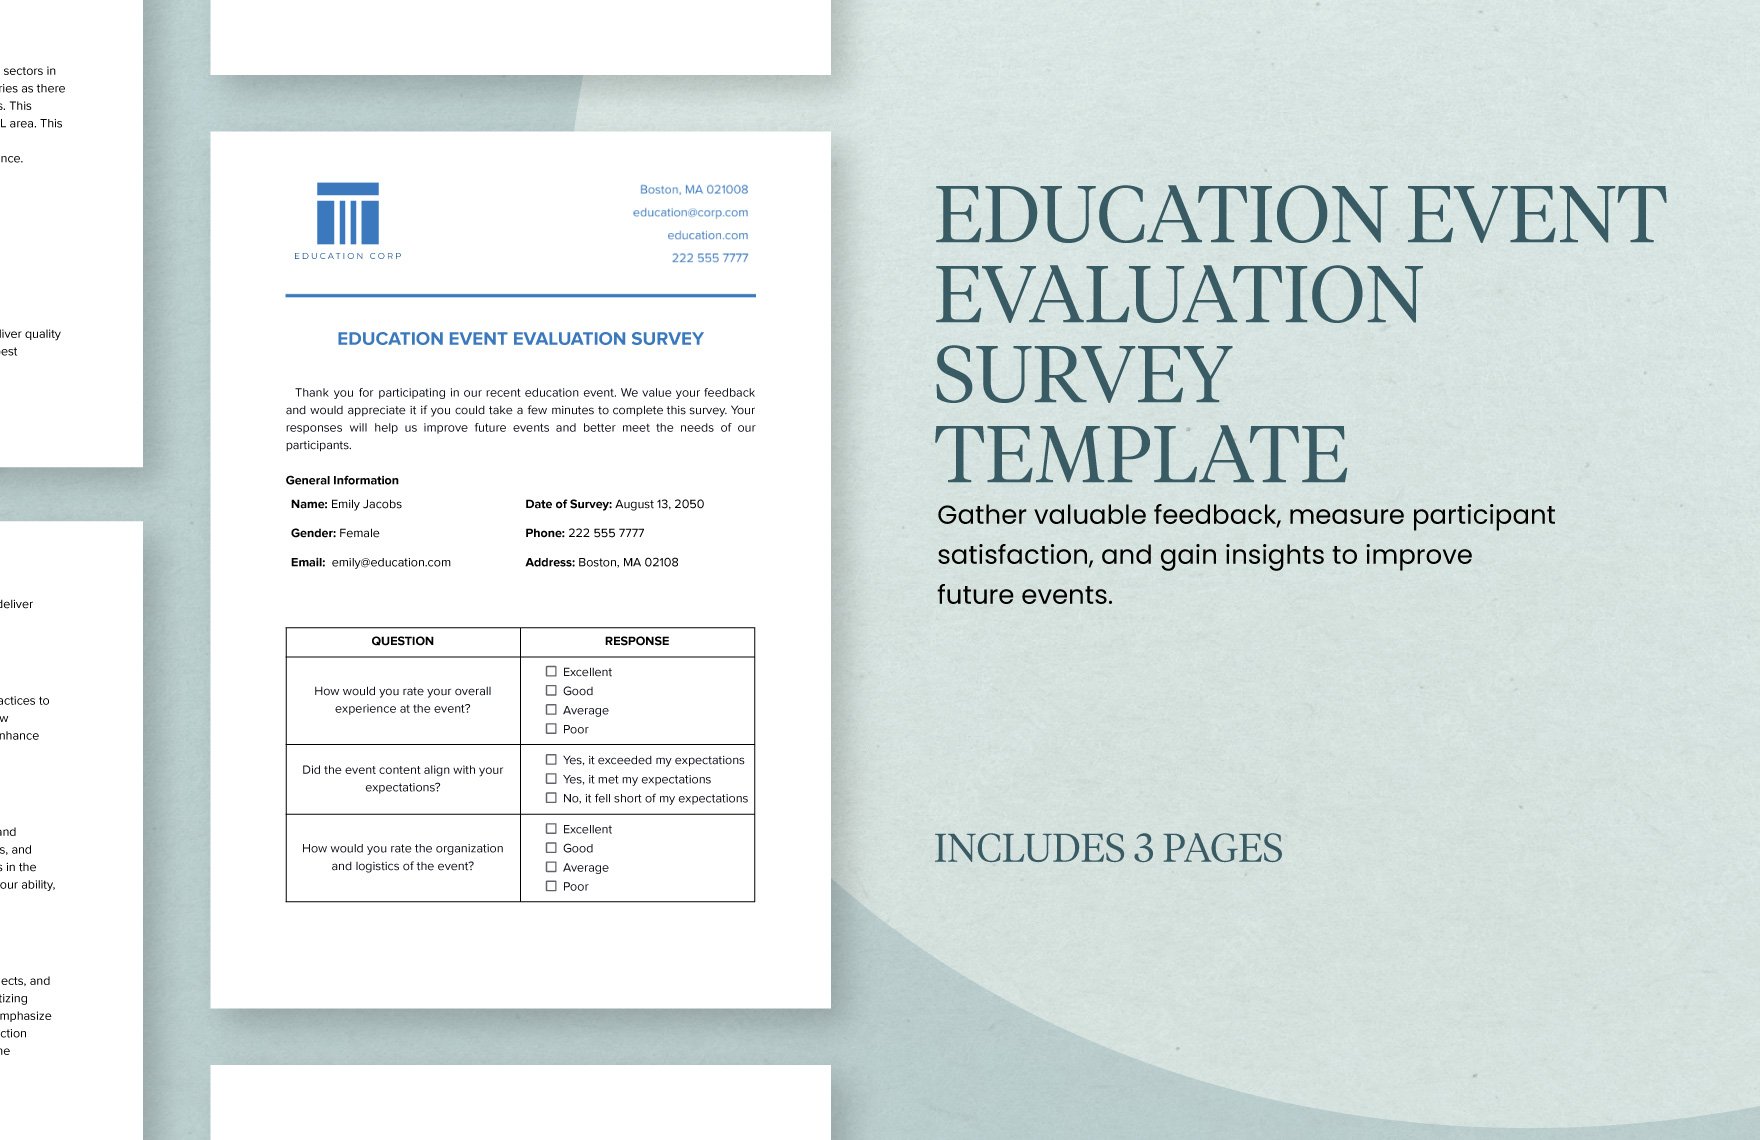 Education Event Evaluation Survey Template in Word, Google Docs, PDF